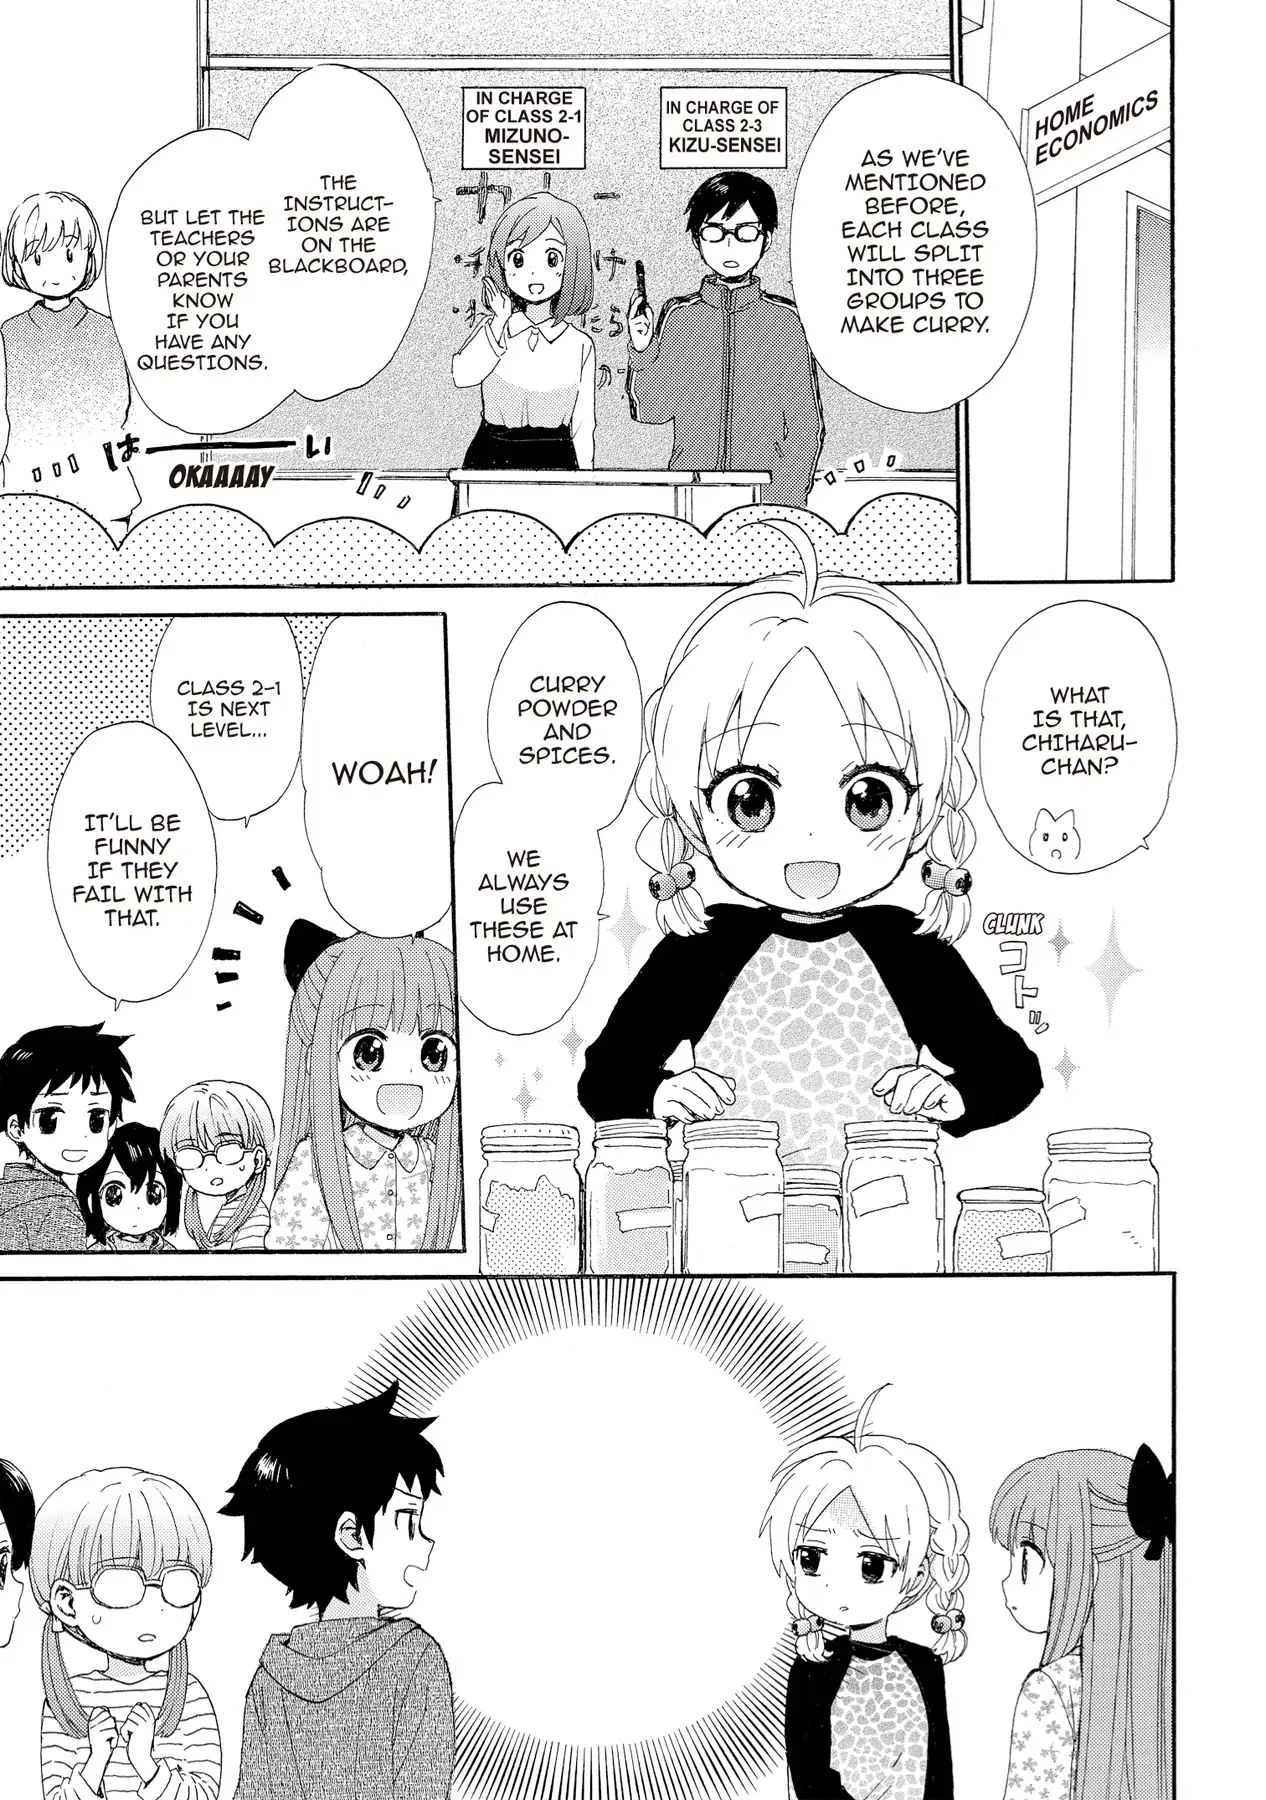 The Cute Little Granny Girl Hinata-chan - chapter 54 - #3